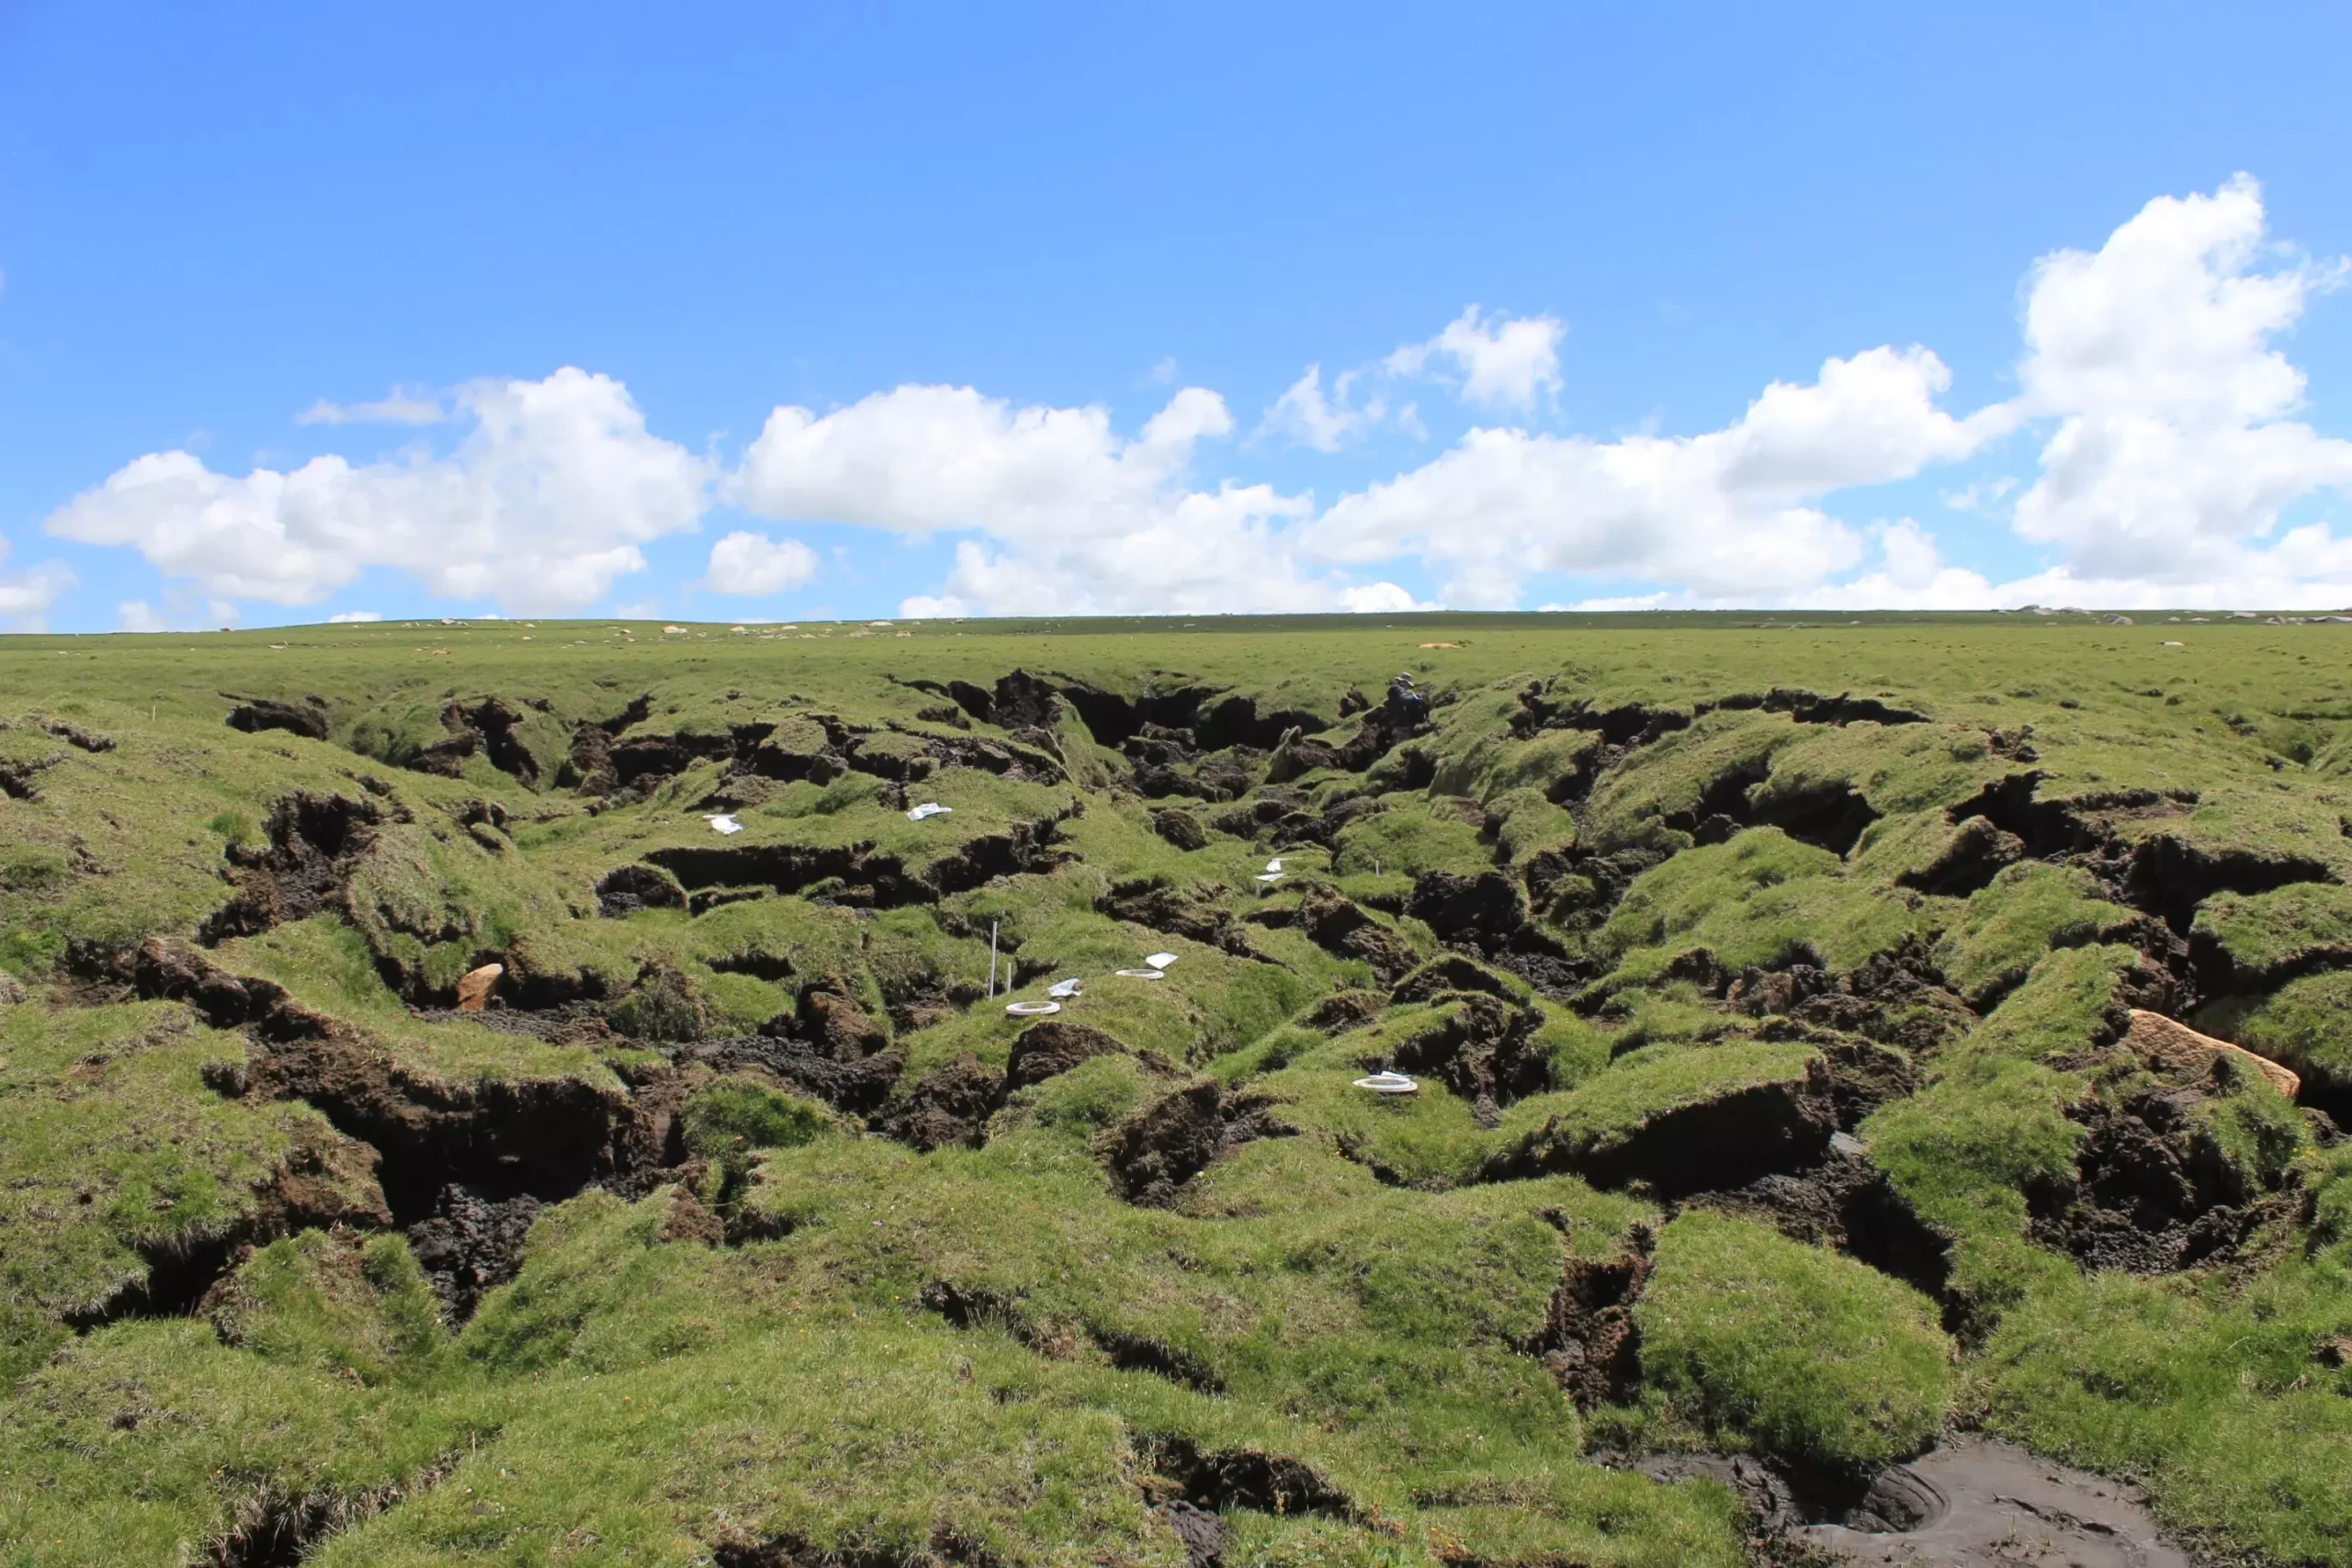 The Impact of Climate Warming on Soil Carbon Dioxide Emissions in Permafrost Regions